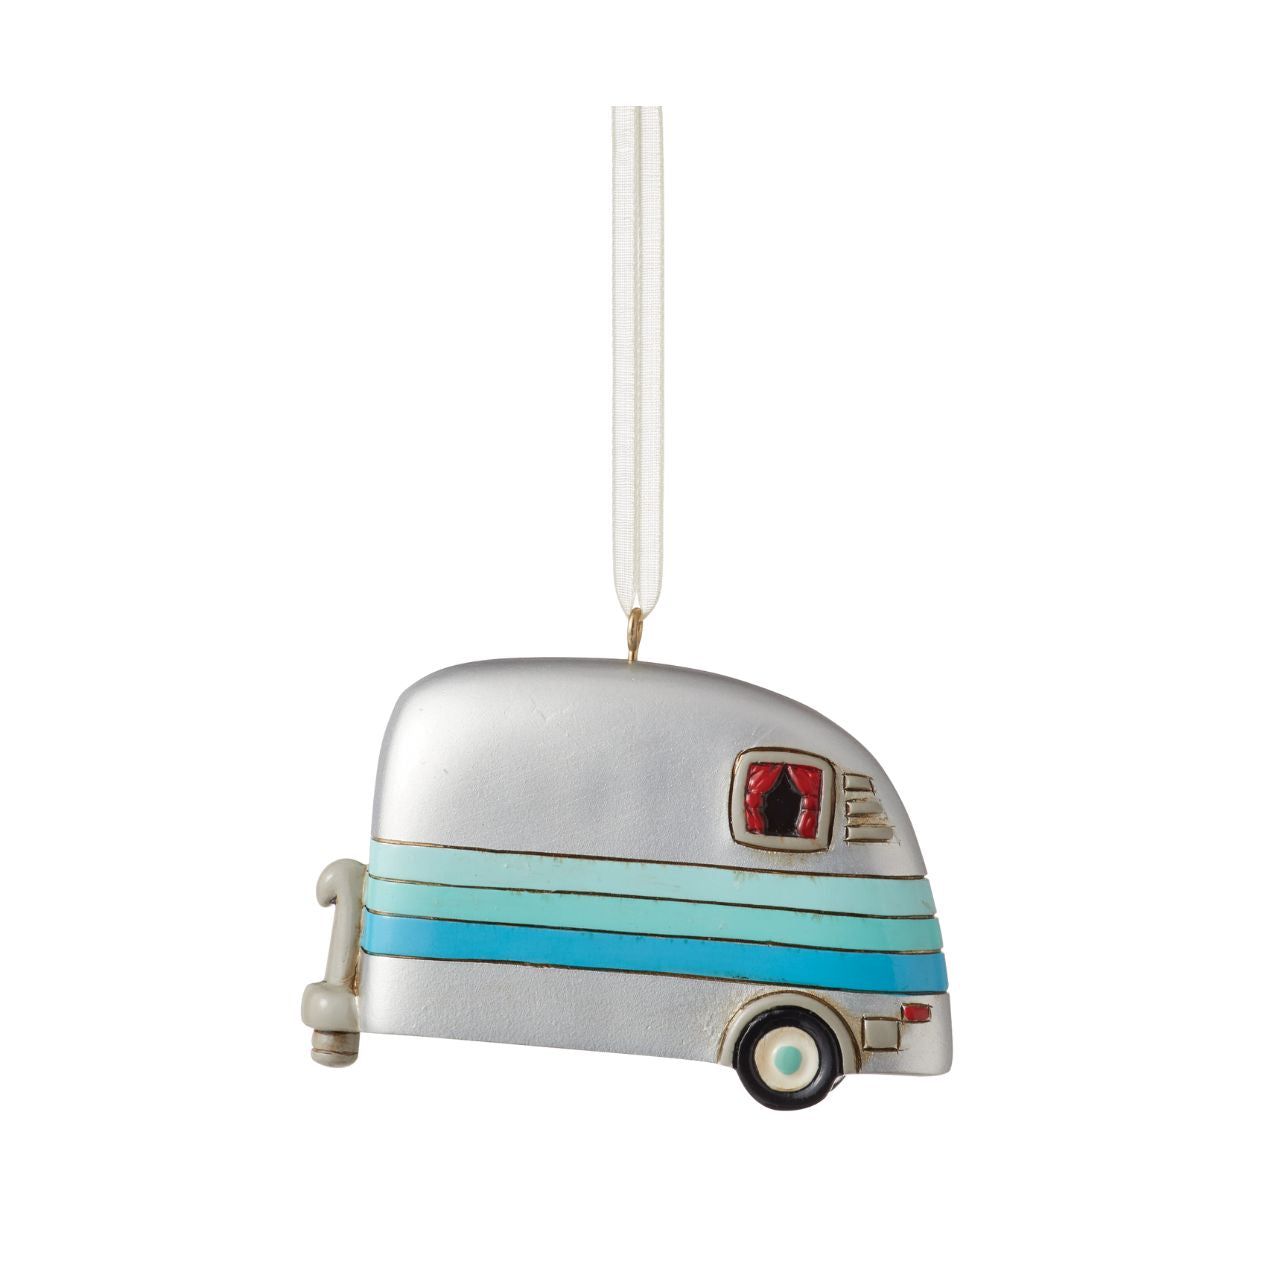 Michelle Allen Happy Camper Hanging Ornament  Who is ready for a camping trip?. Our Happy Camper Hanging Ornament is inspired by a vintage trailer and has so much personality. The shiny silver colour, retro stripes, window and curtain detail adds lots of charisma to this classic design.